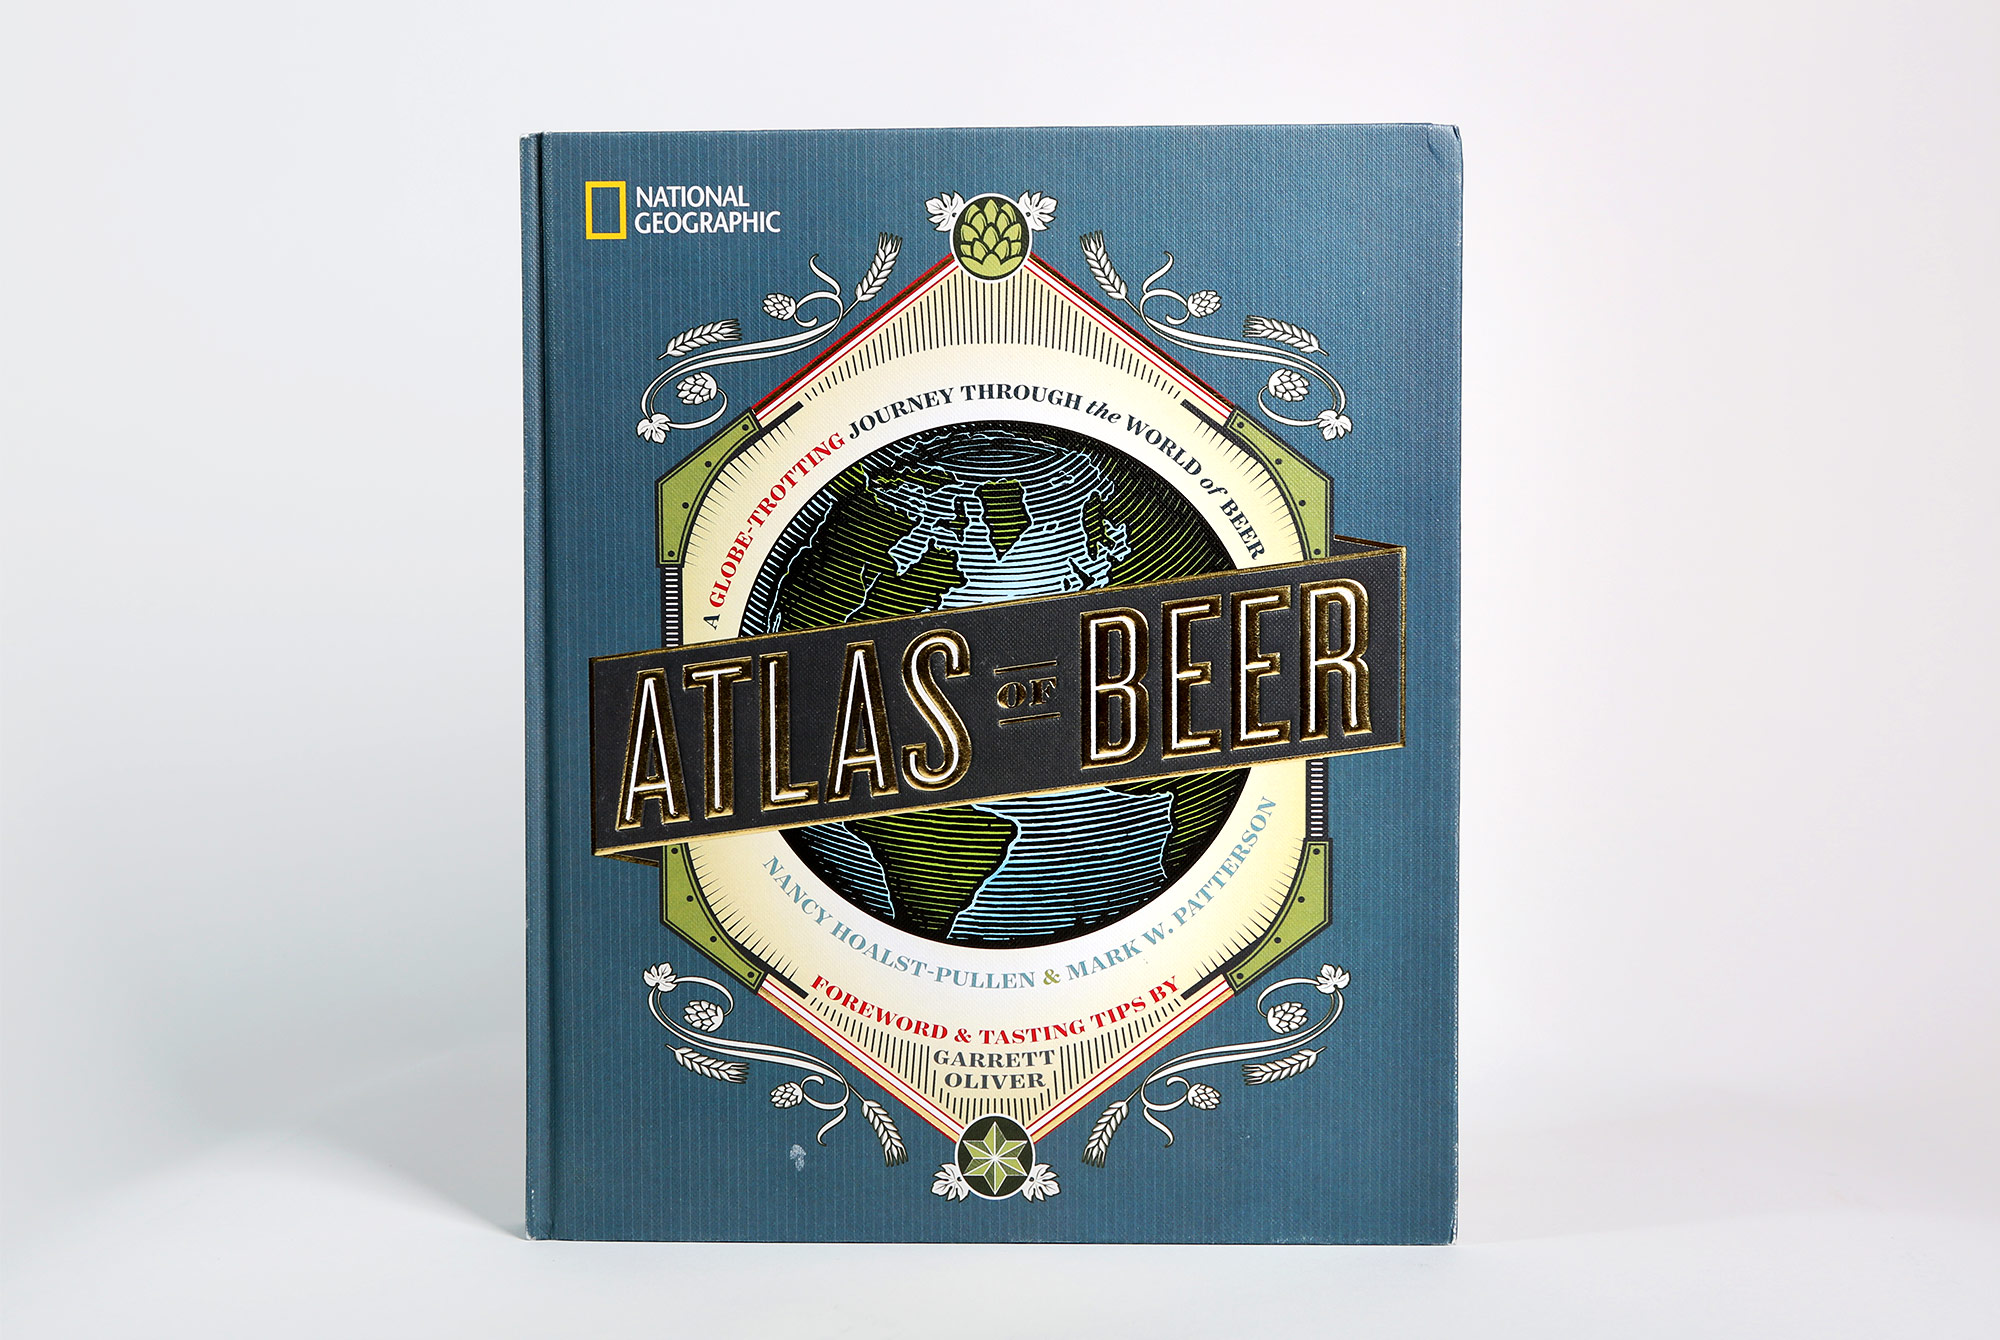 Explore the World of Beer with National Geographic